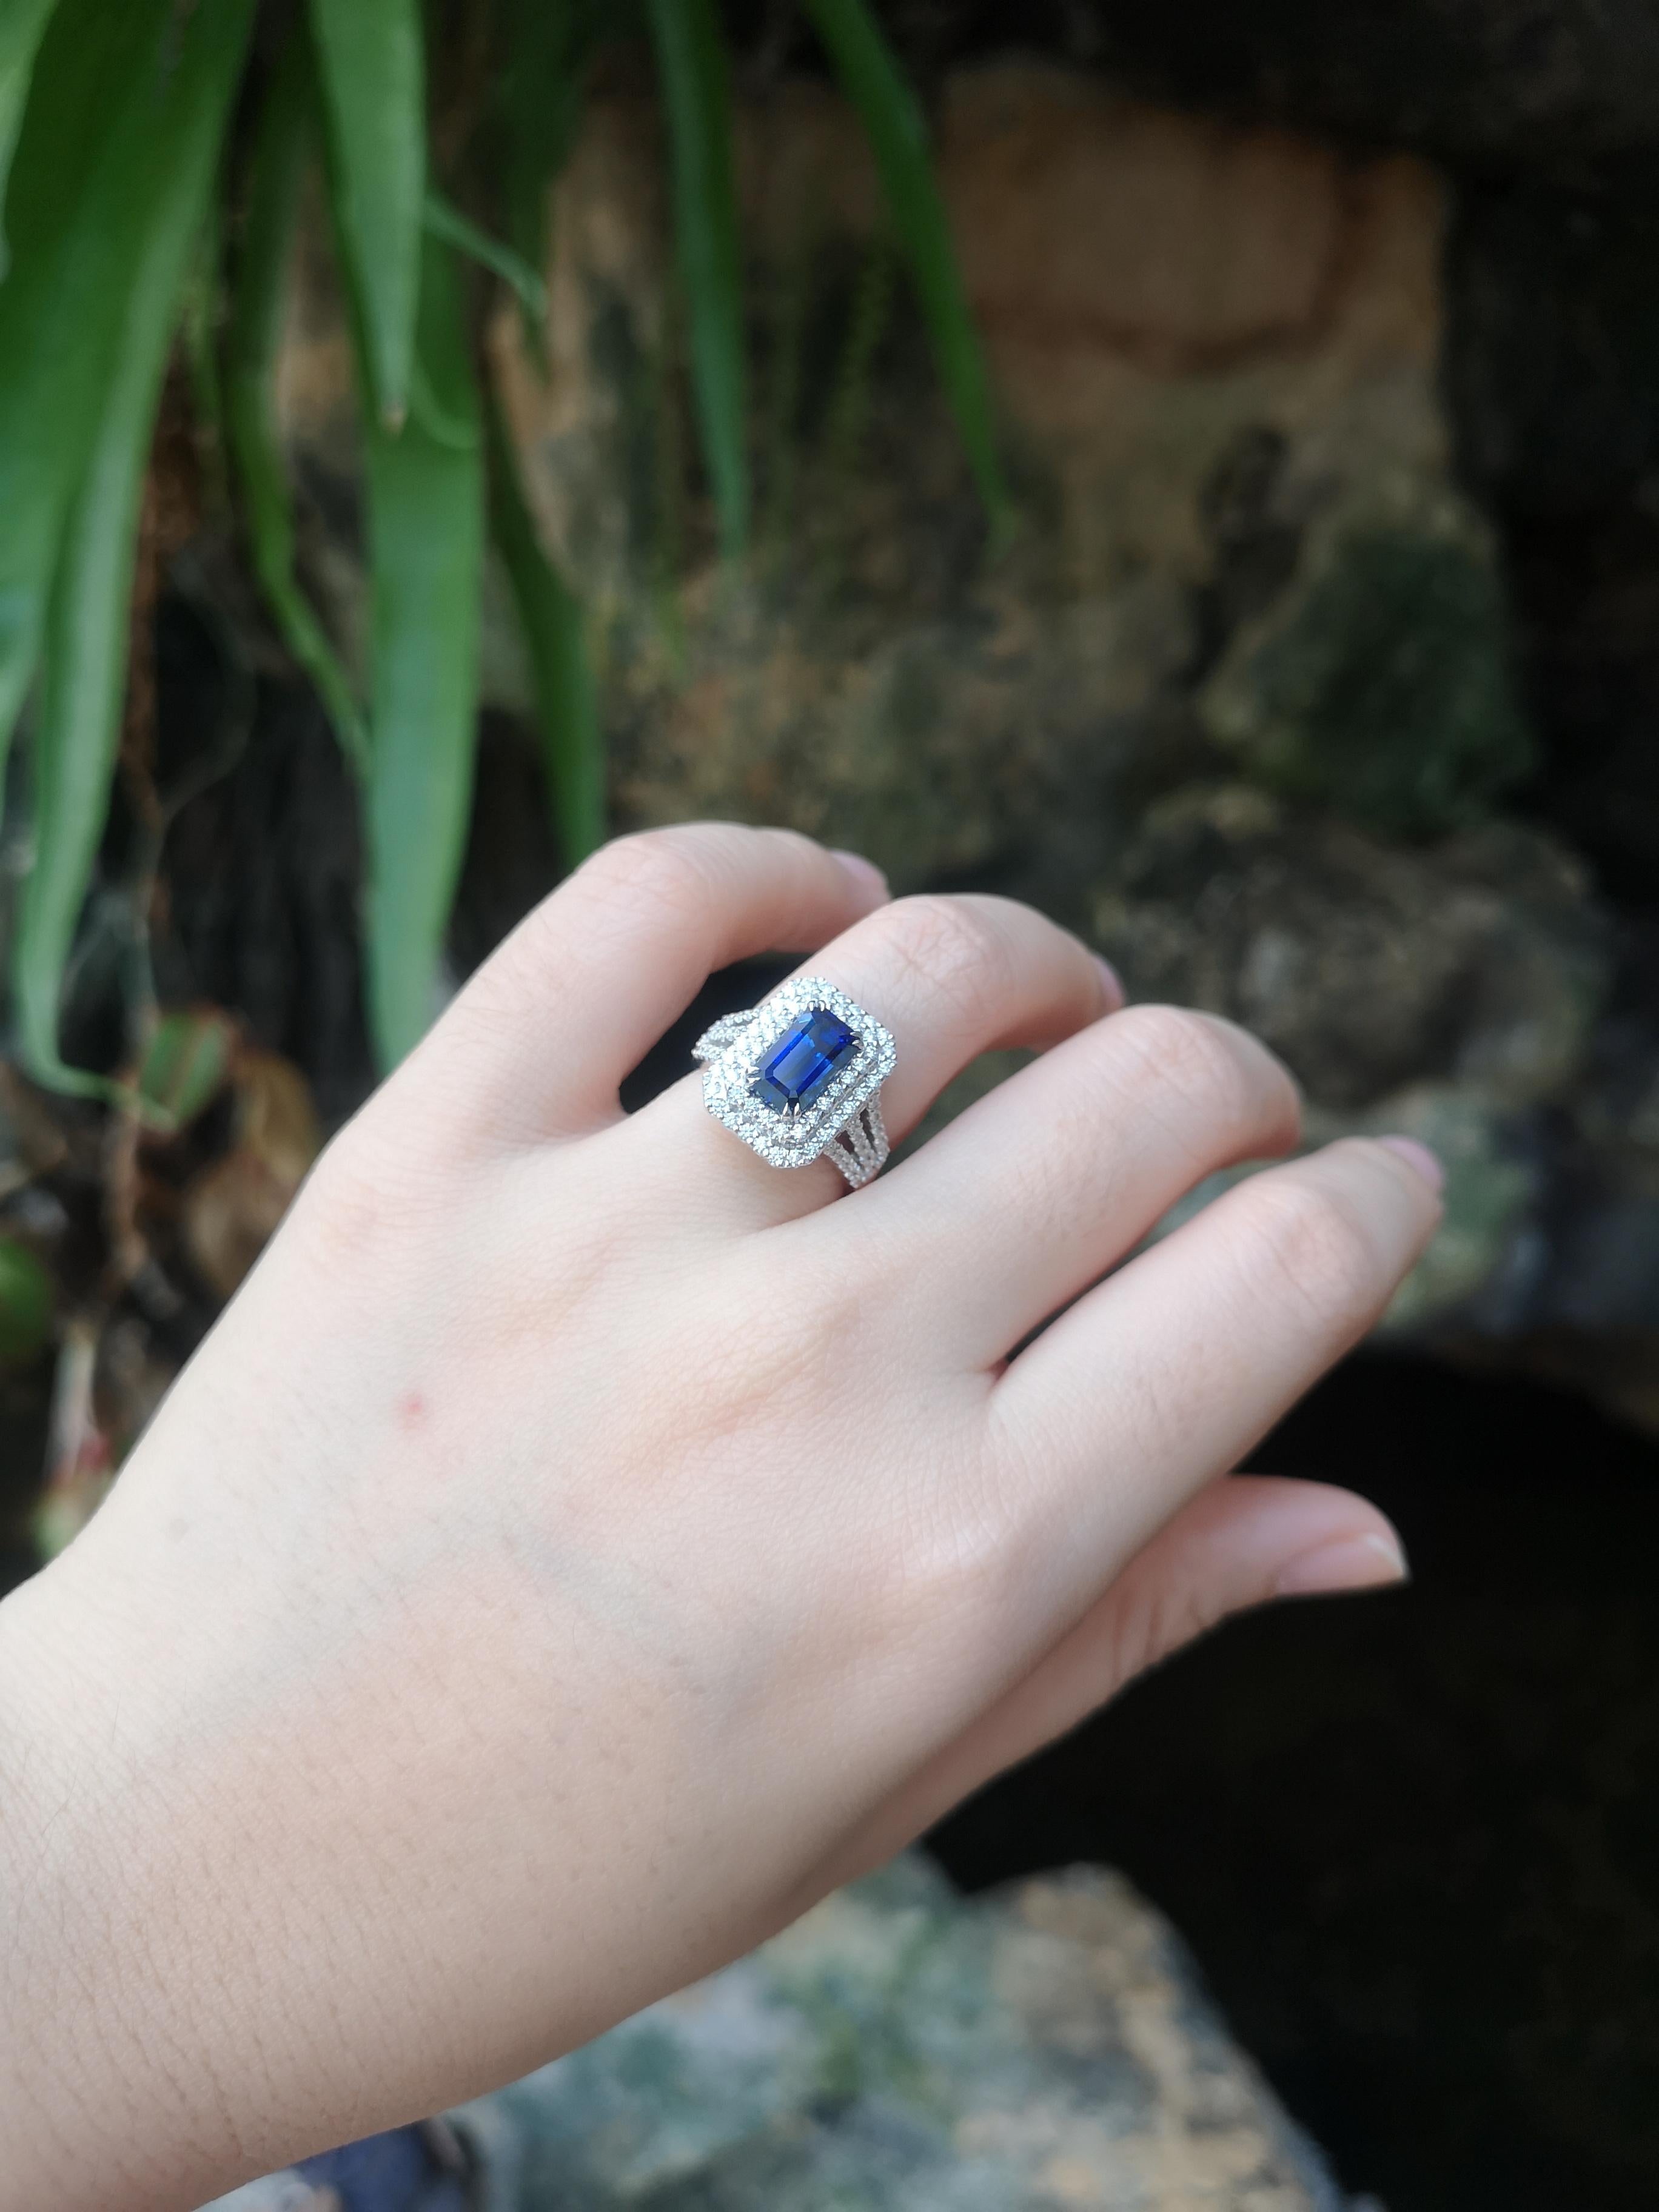 Blue Sapphire 3.76 carats with Diamond 0.96 carat Ring set in 18 Karat White Gold Settings
(GIA Certified)

Width:  1.2 cm 
Length: 1.6 cm
Ring Size: 54
Total Weight: 10.34 grams

Blue Sapphire 
Width:  0.5 cm 
Length: 0.9 cm

